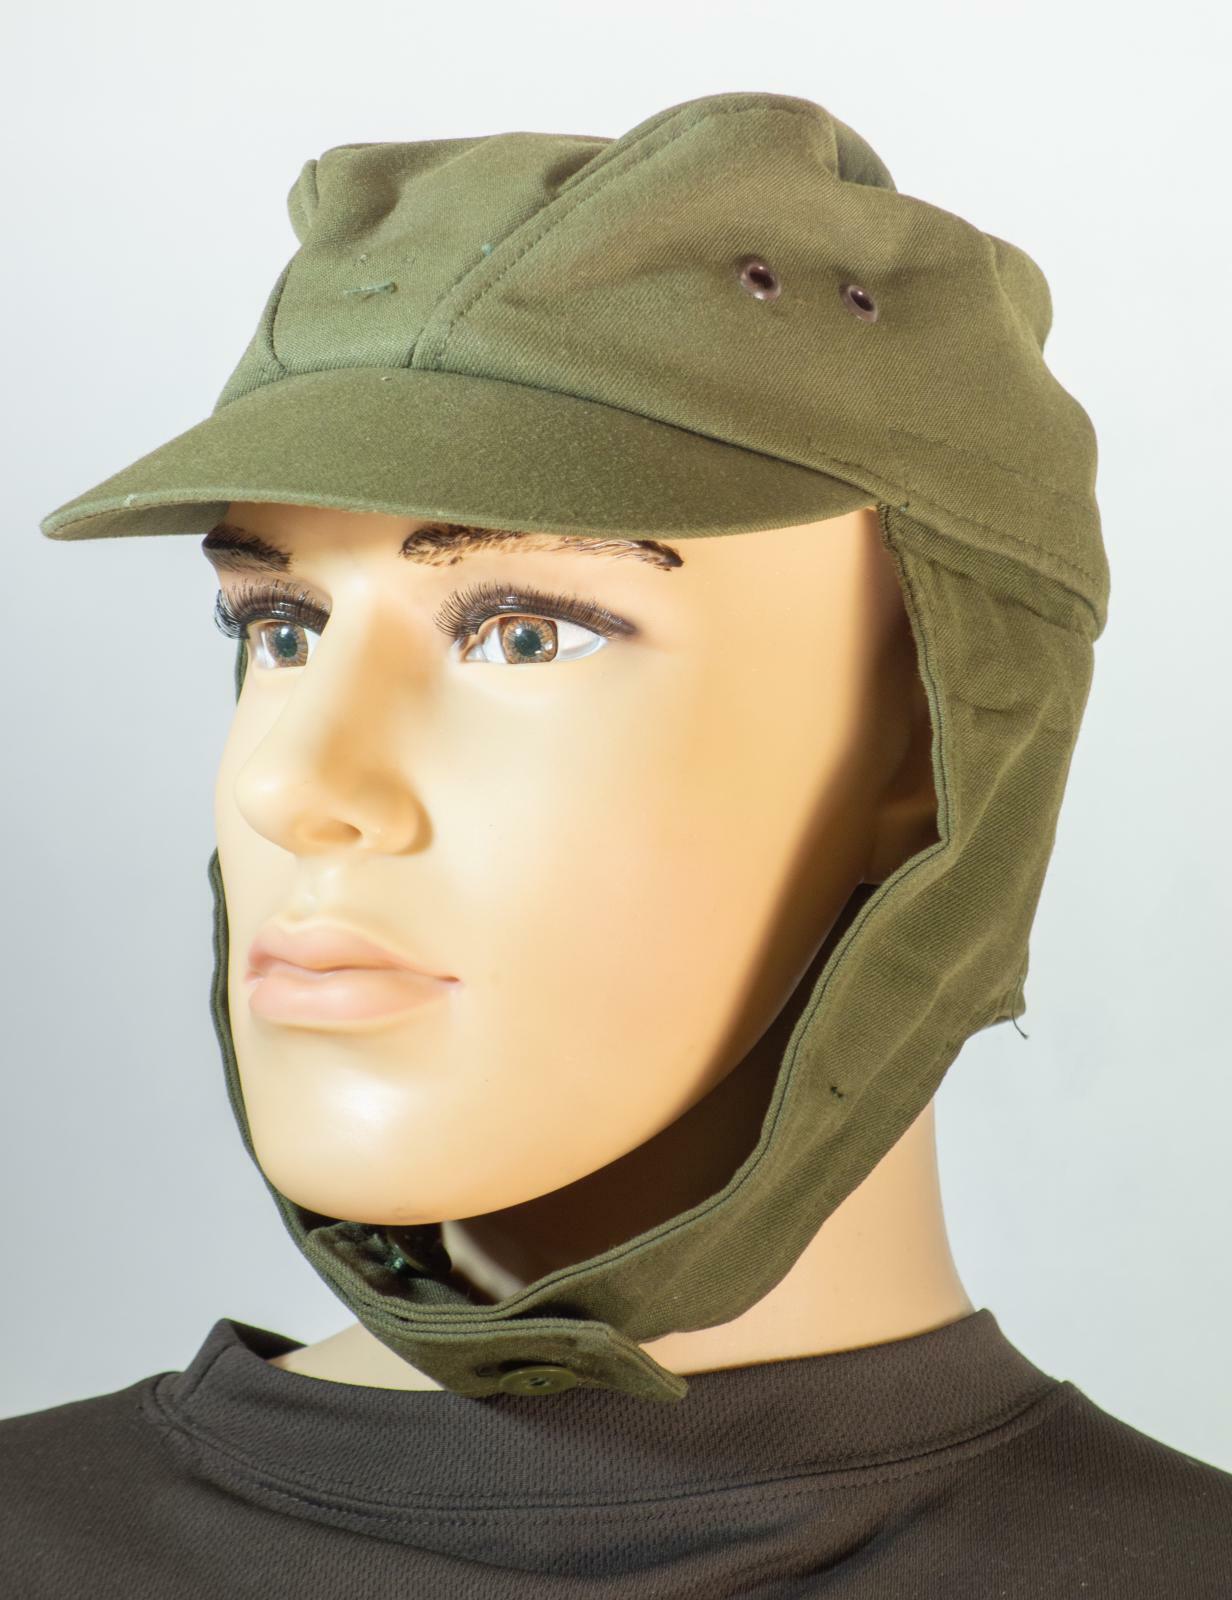 Czech army surplus M85 olive green field cap with neck cover | eBay